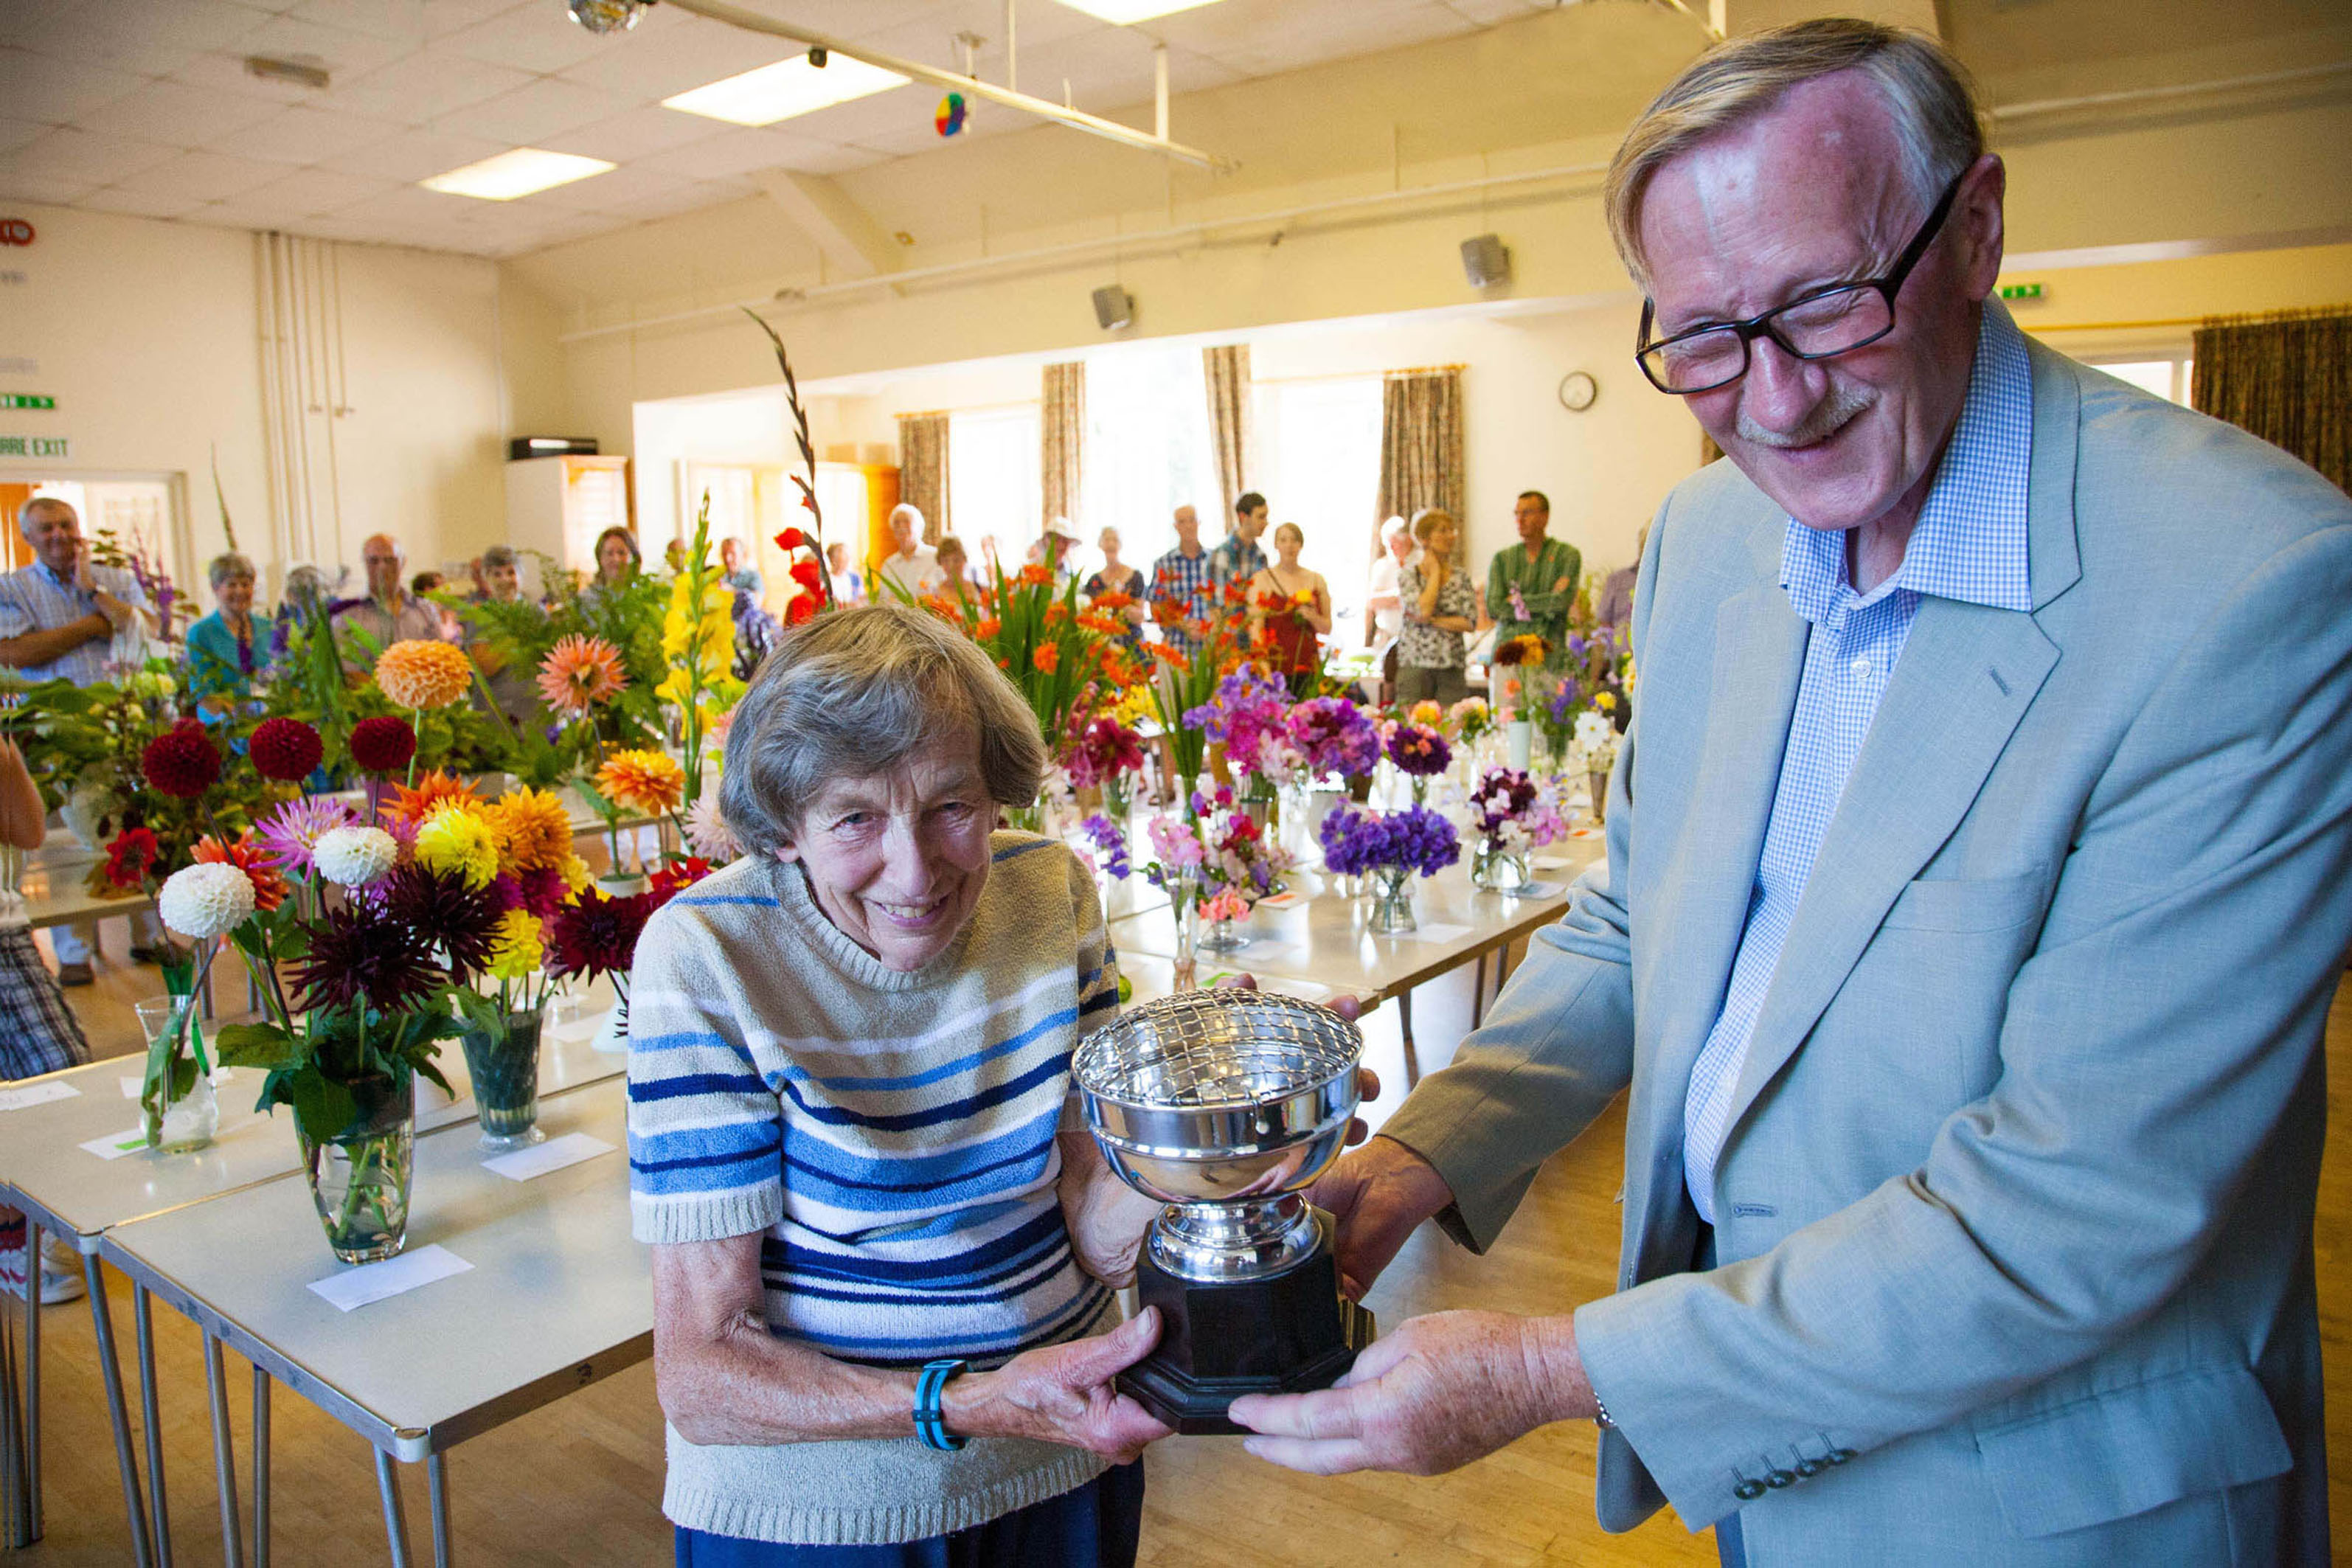 Cynthia Bussey being presented, at the 2015 show, with the Old Court Nursery Rose Bowl for her perennial flower display